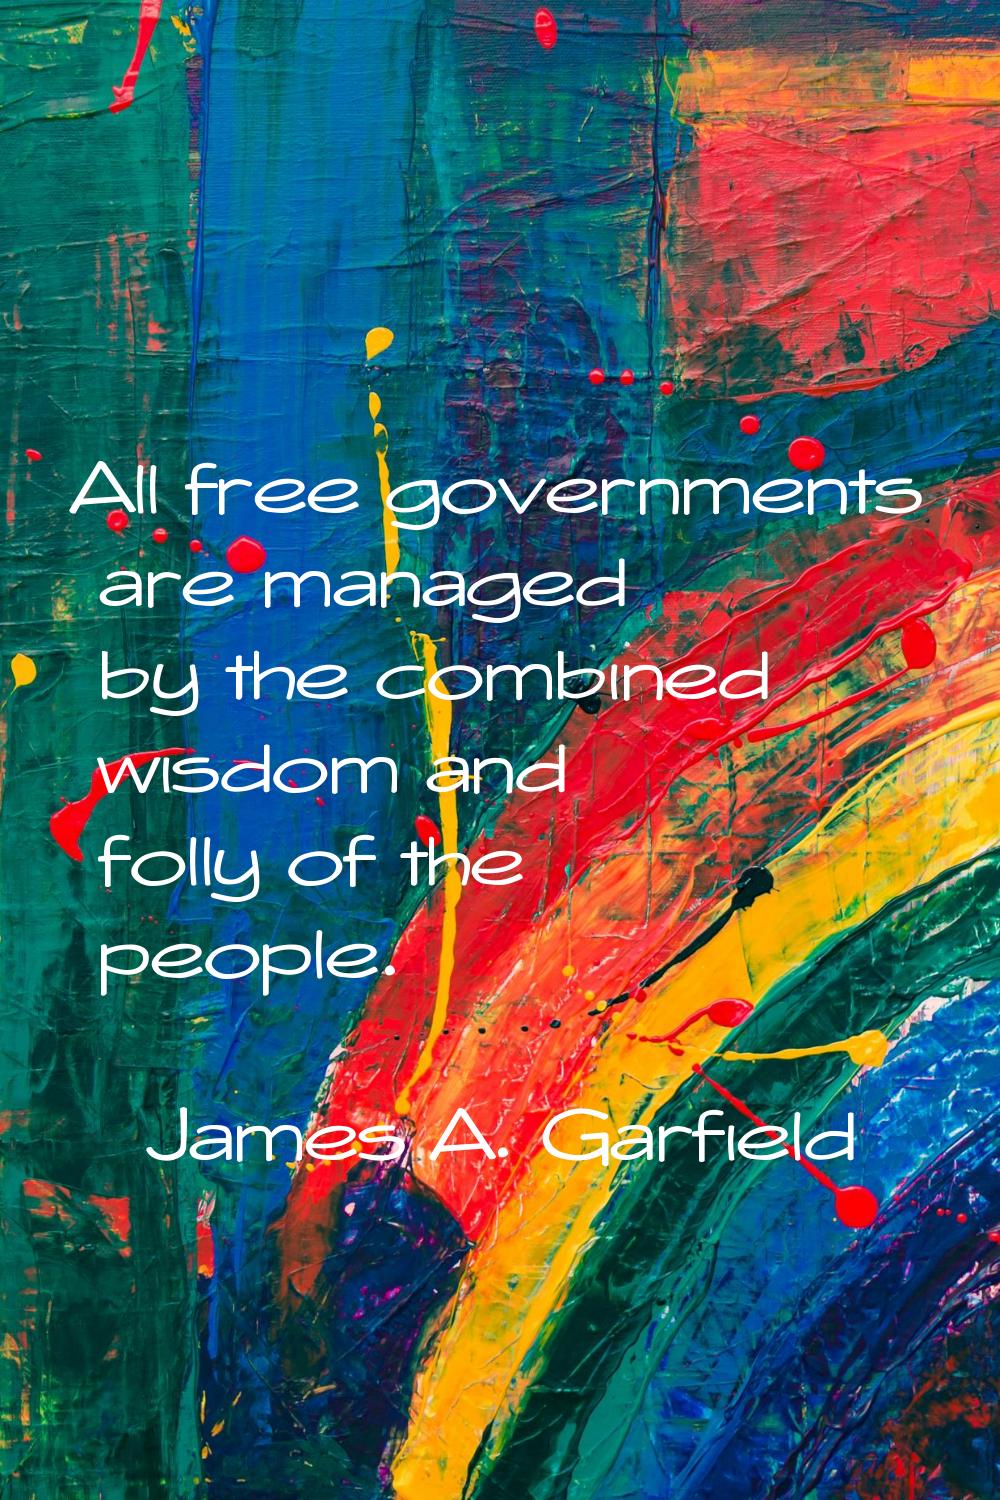 All free governments are managed by the combined wisdom and folly of the people.